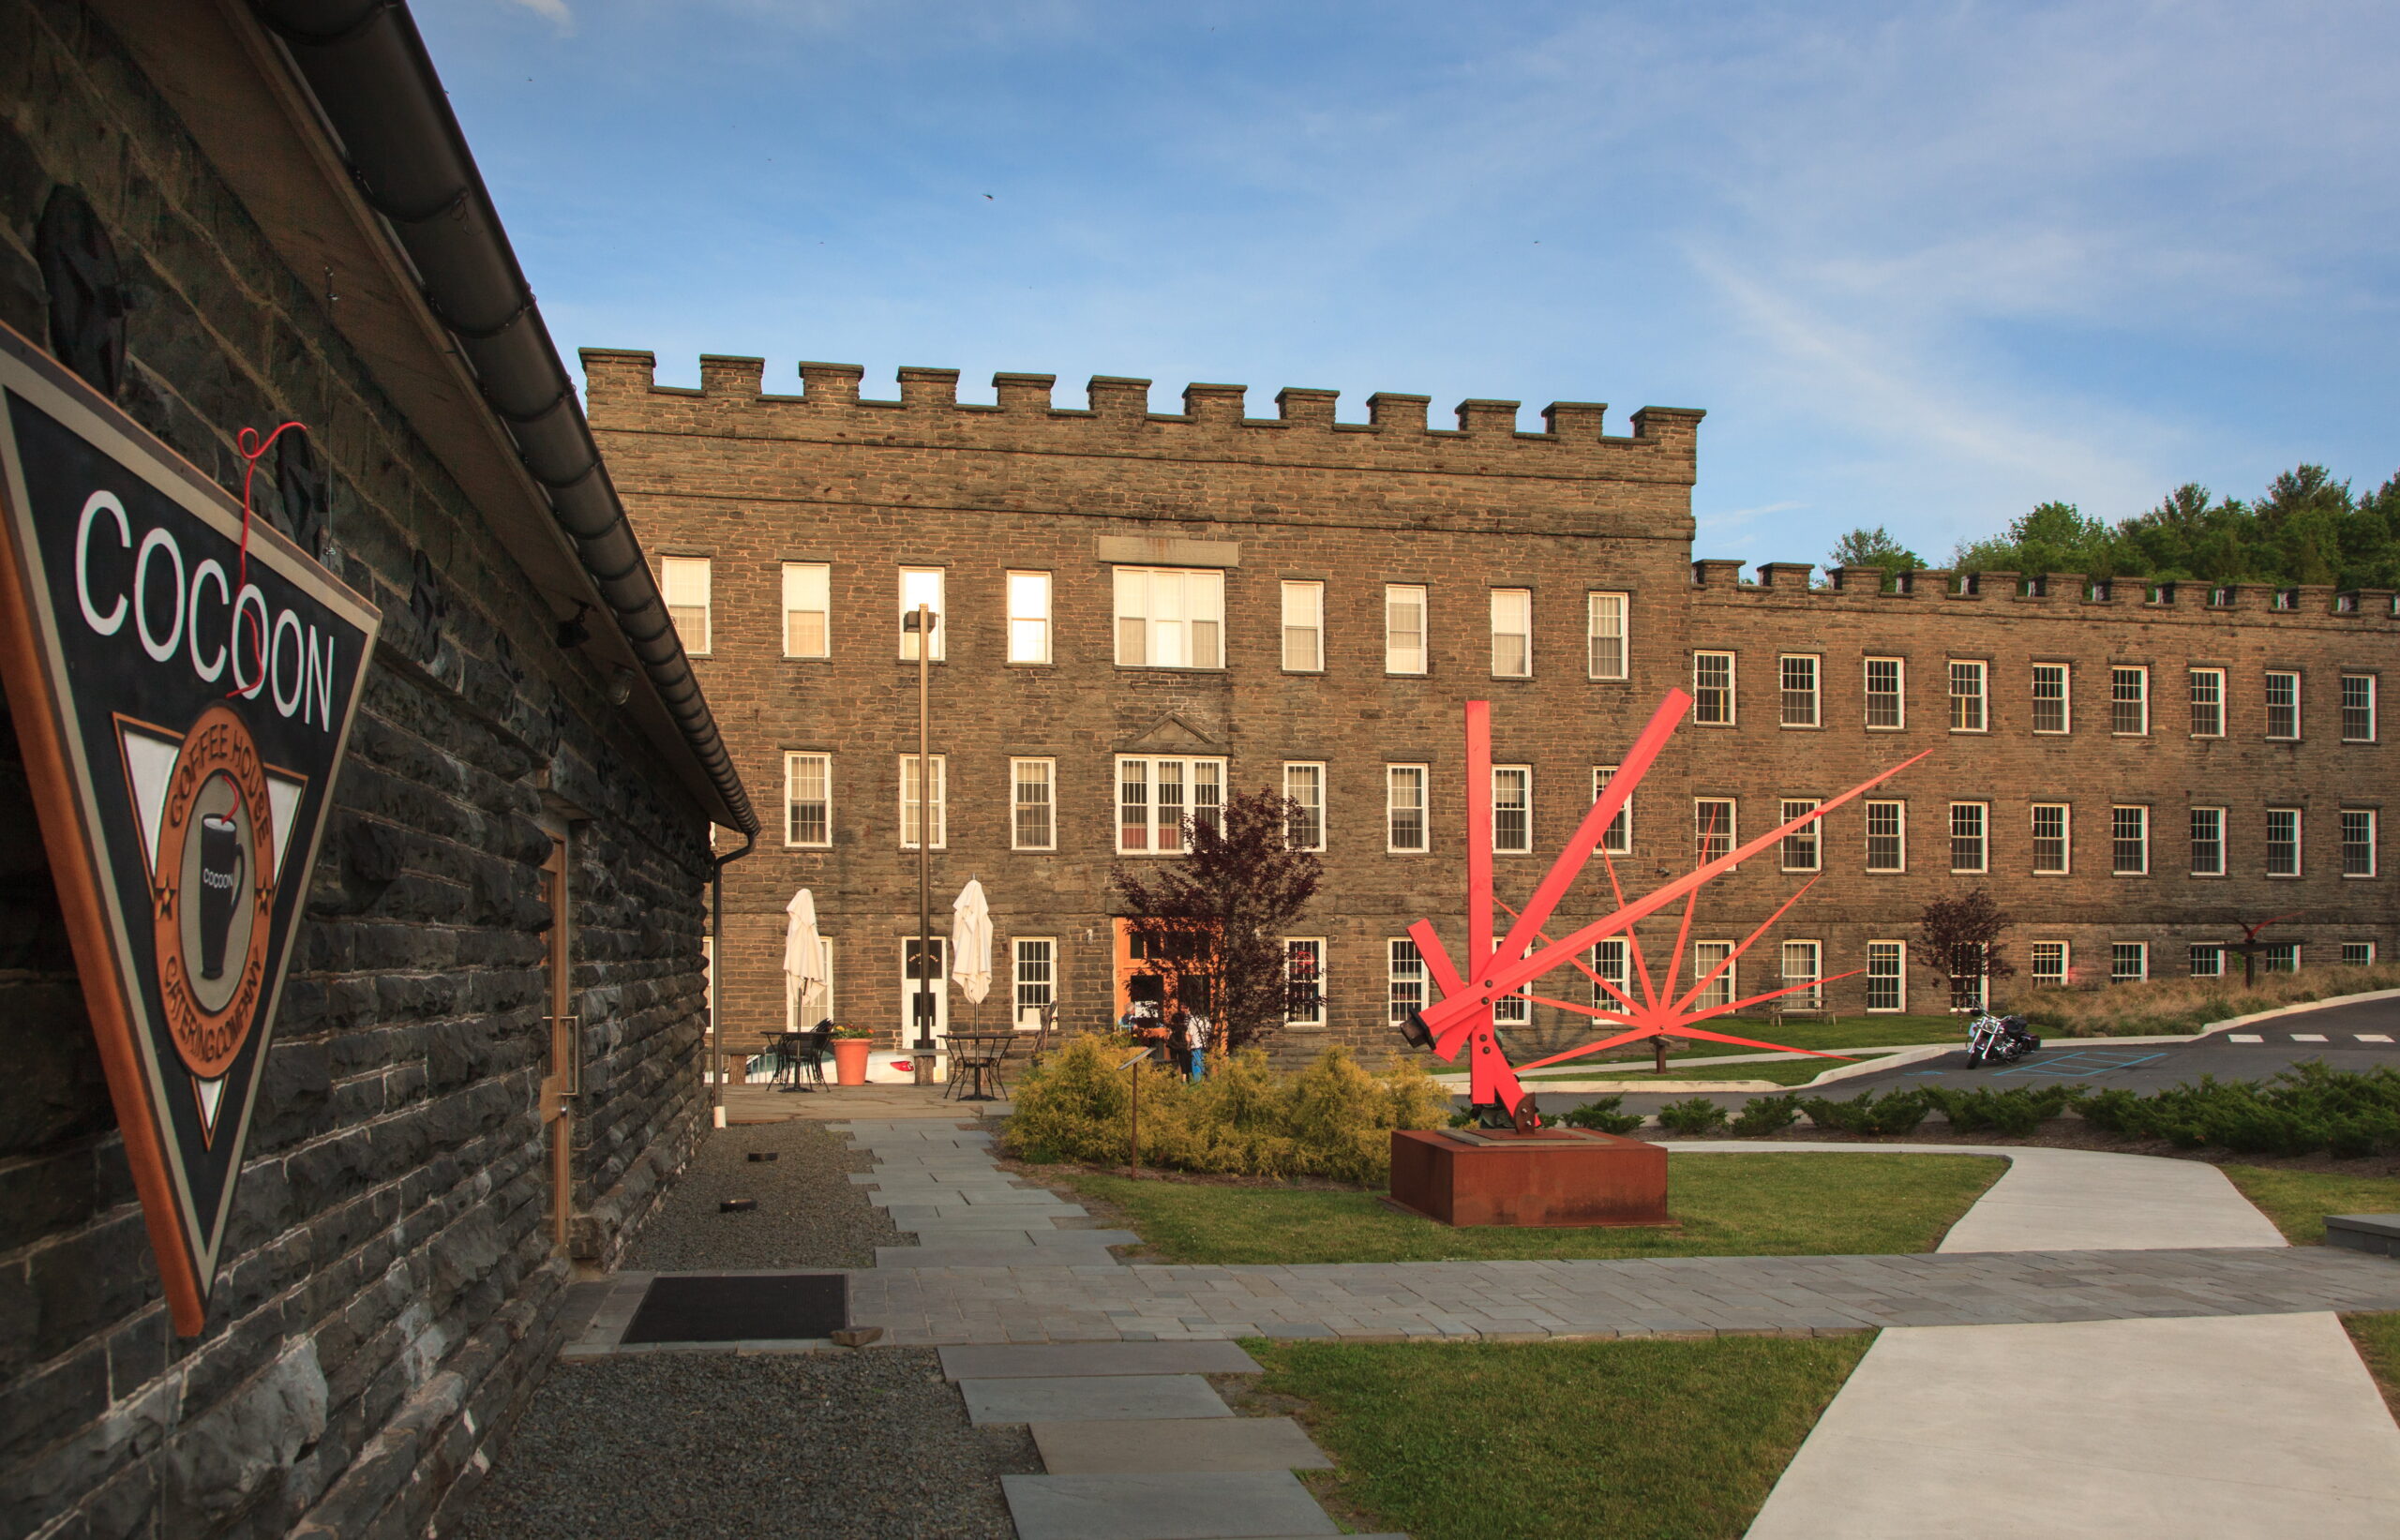 Top 5 Things to Do and See at the Hawley Silk Mill